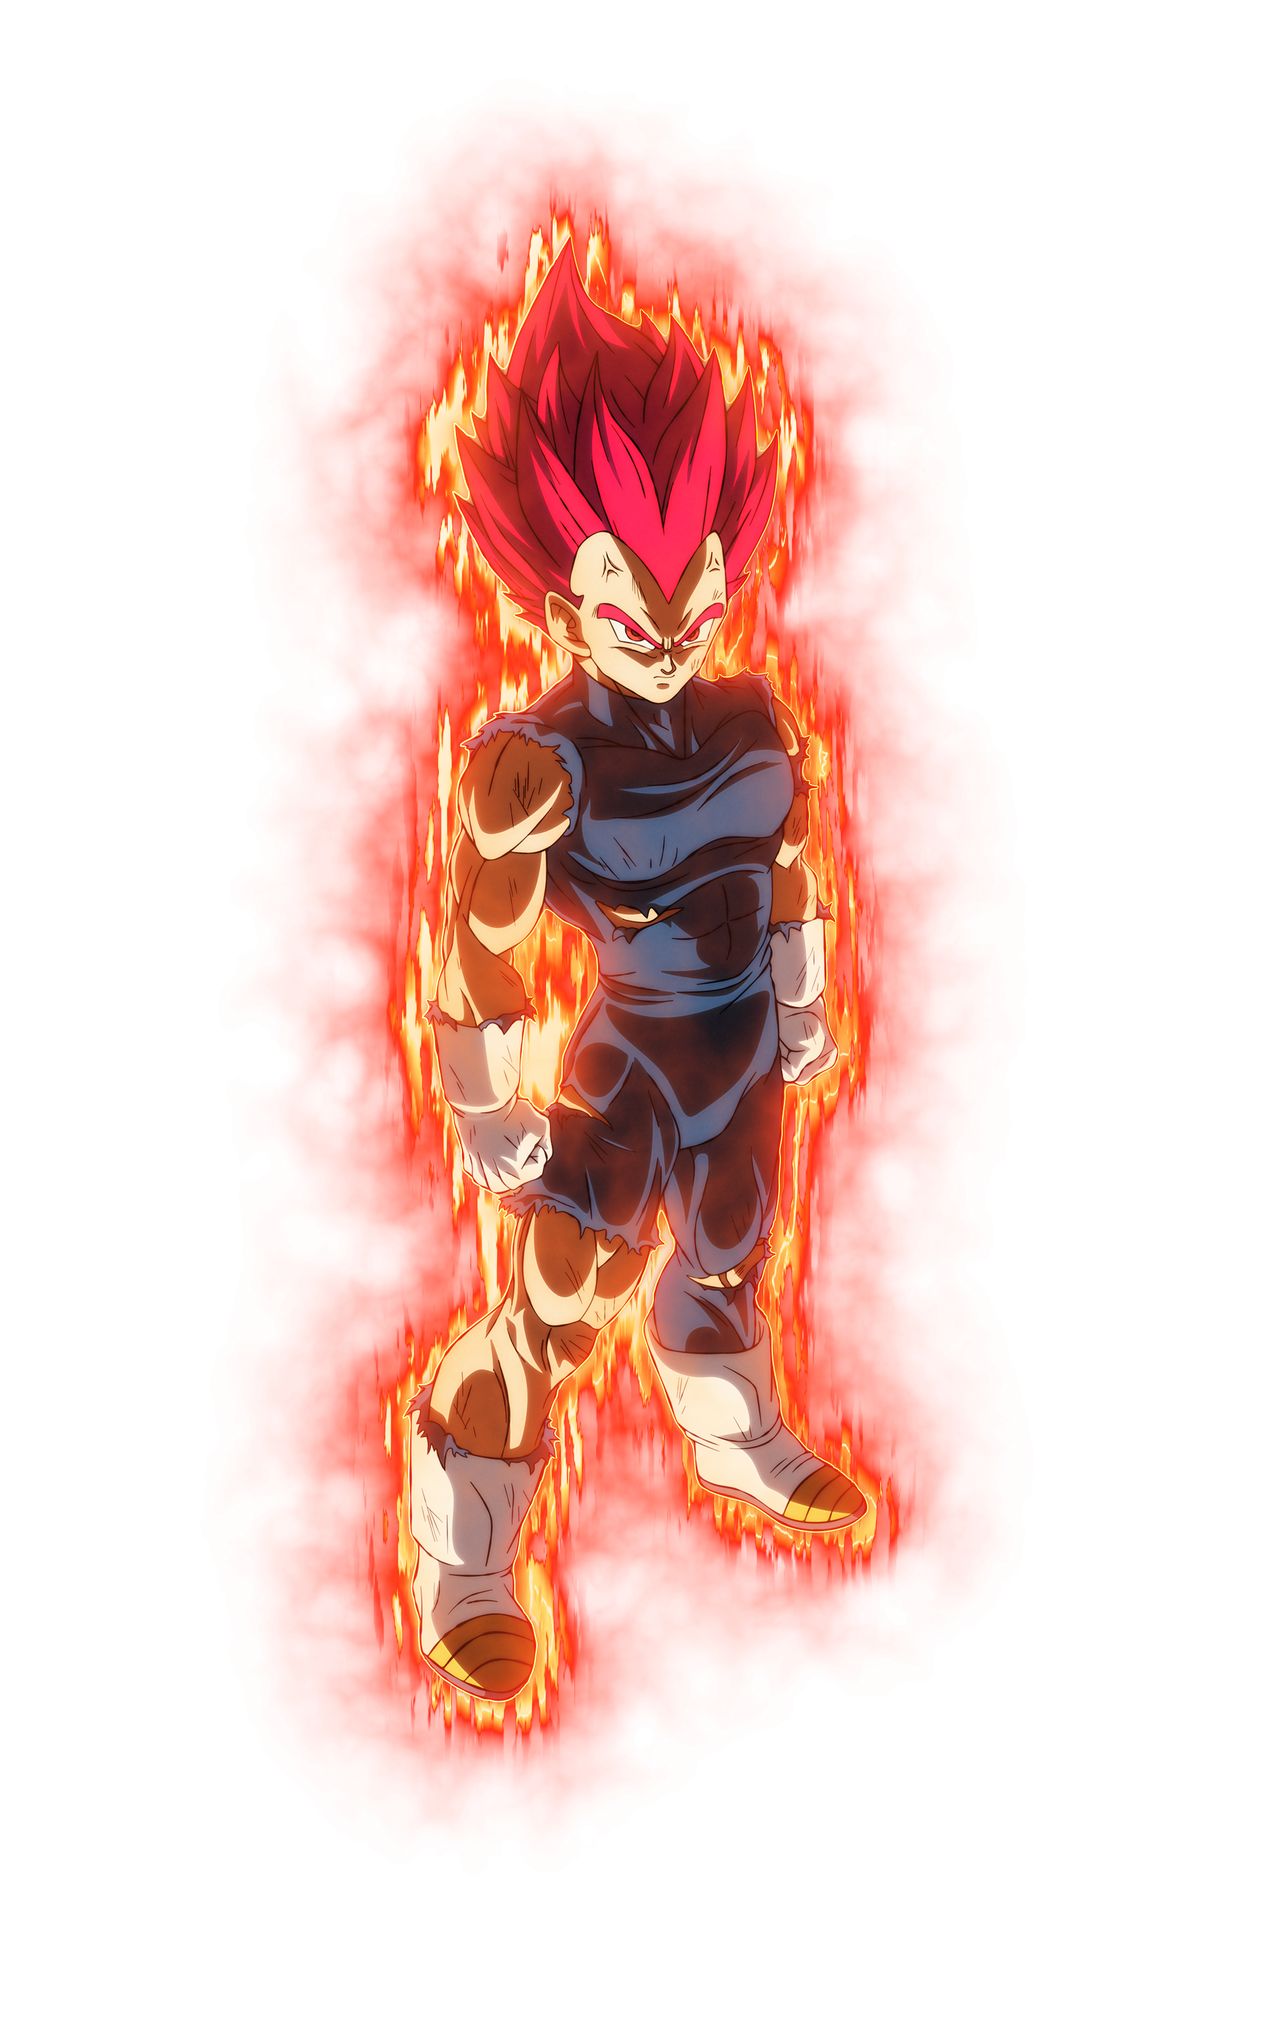 Prince GAS Vegeta on X: Welcome to the first Super Saiyan 5 Goku made with  Artificial Intelligence 🤖 in 4 adorable variants 👌 Special thanks to  @Un_koshin1402 for the missing hand artwork